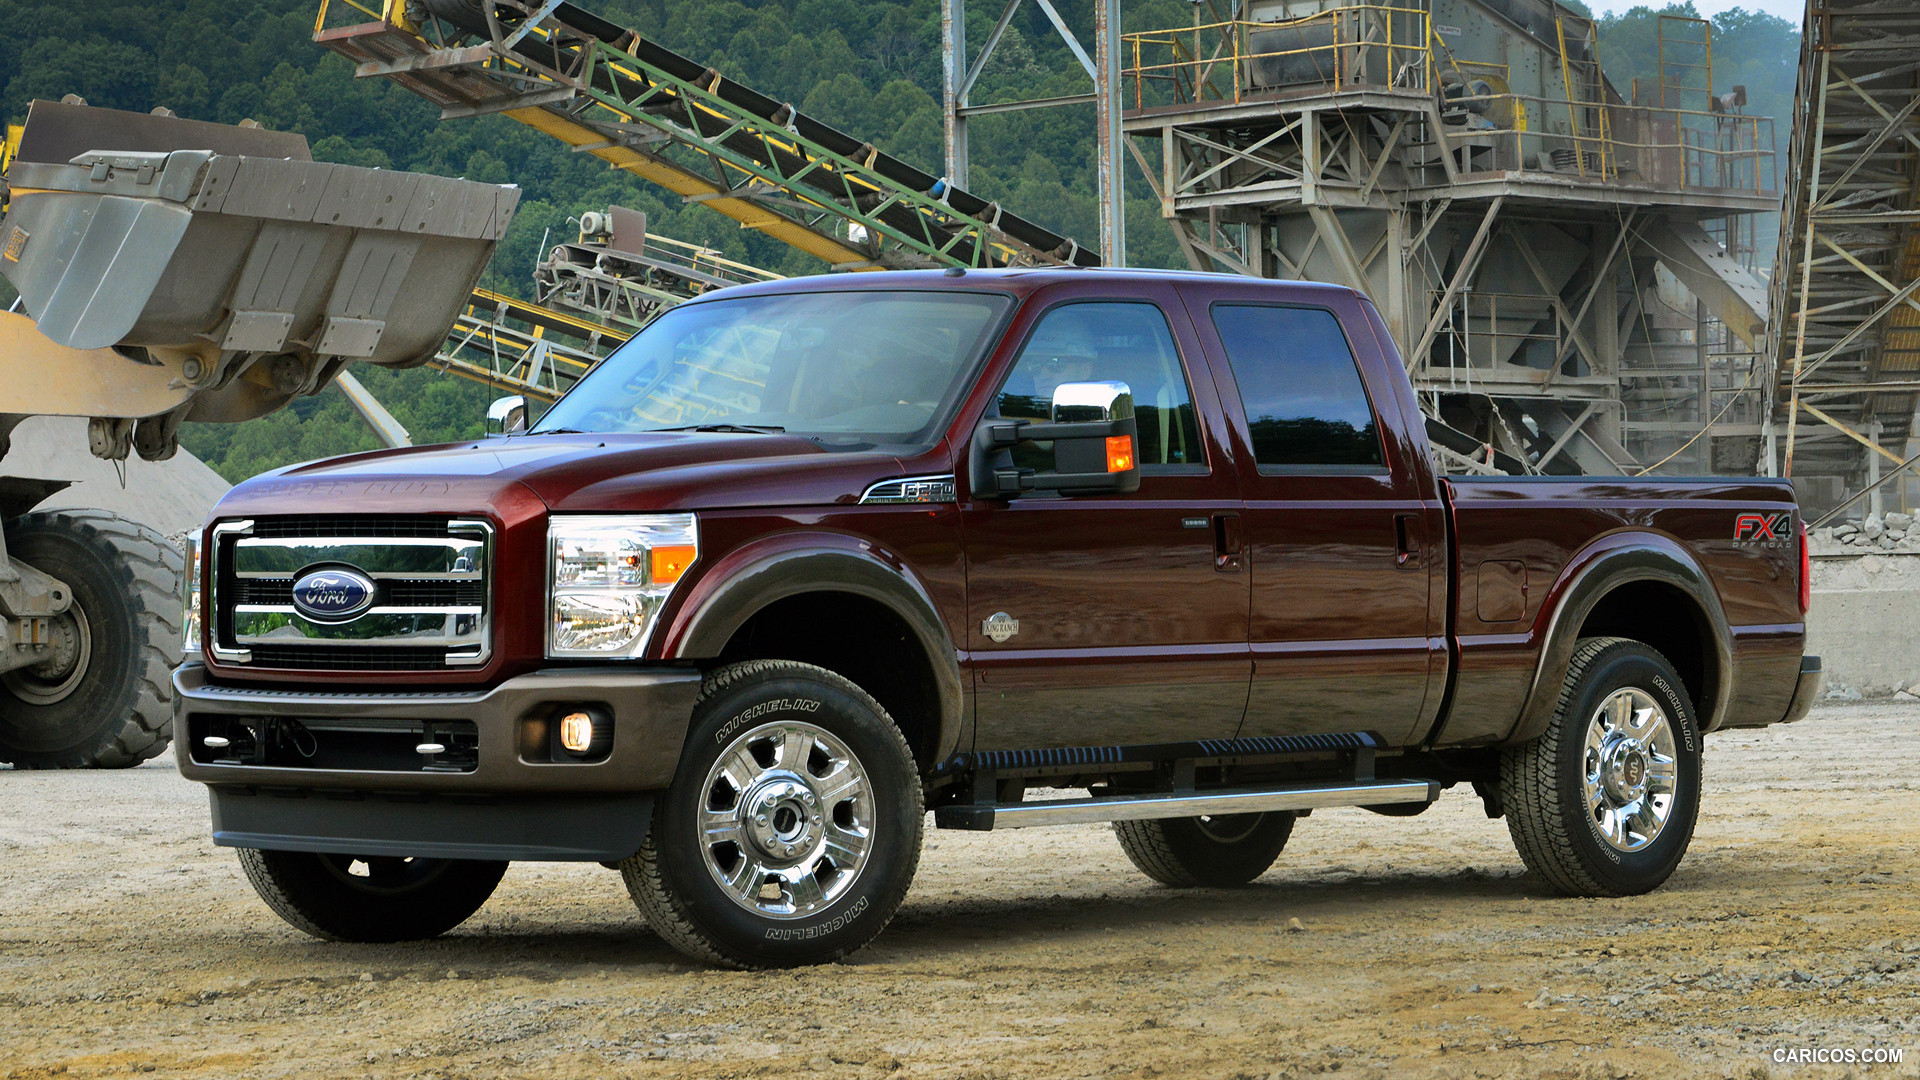 Ford F 250 Super Duty King Ranch Wallpapers Vehicles Hq Ford F 250 Super Duty King Ranch Pictures 4k Wallpapers 2019